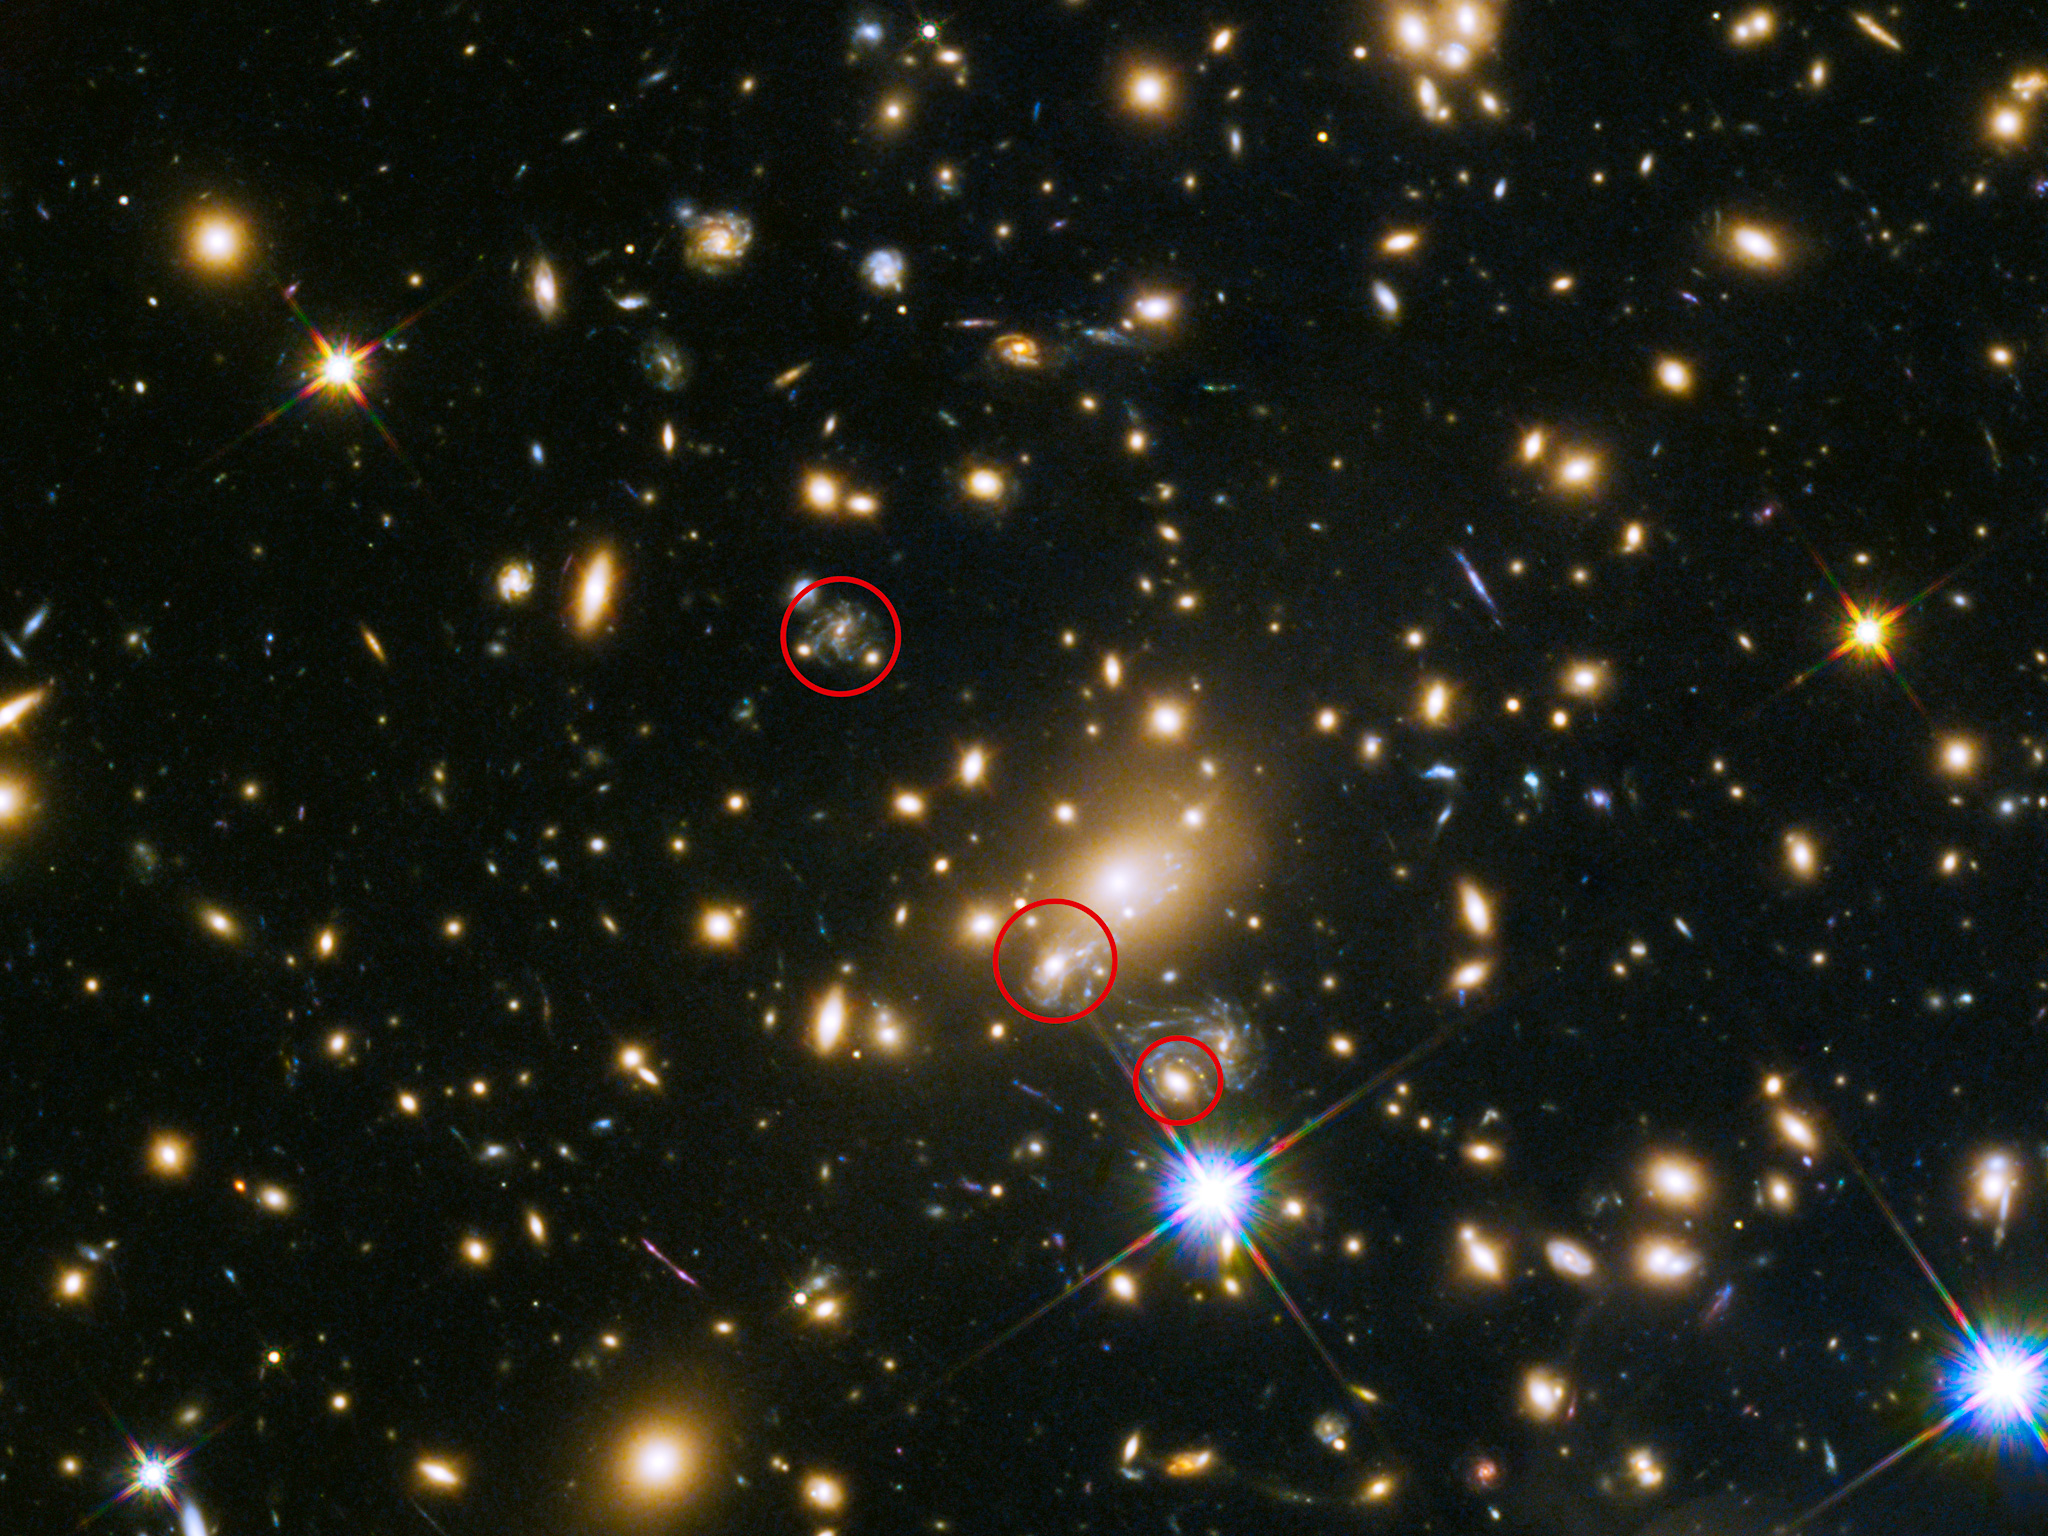 The field is filled with galaxies. One galaxy in particular is gravitationally lensed (circled in red)